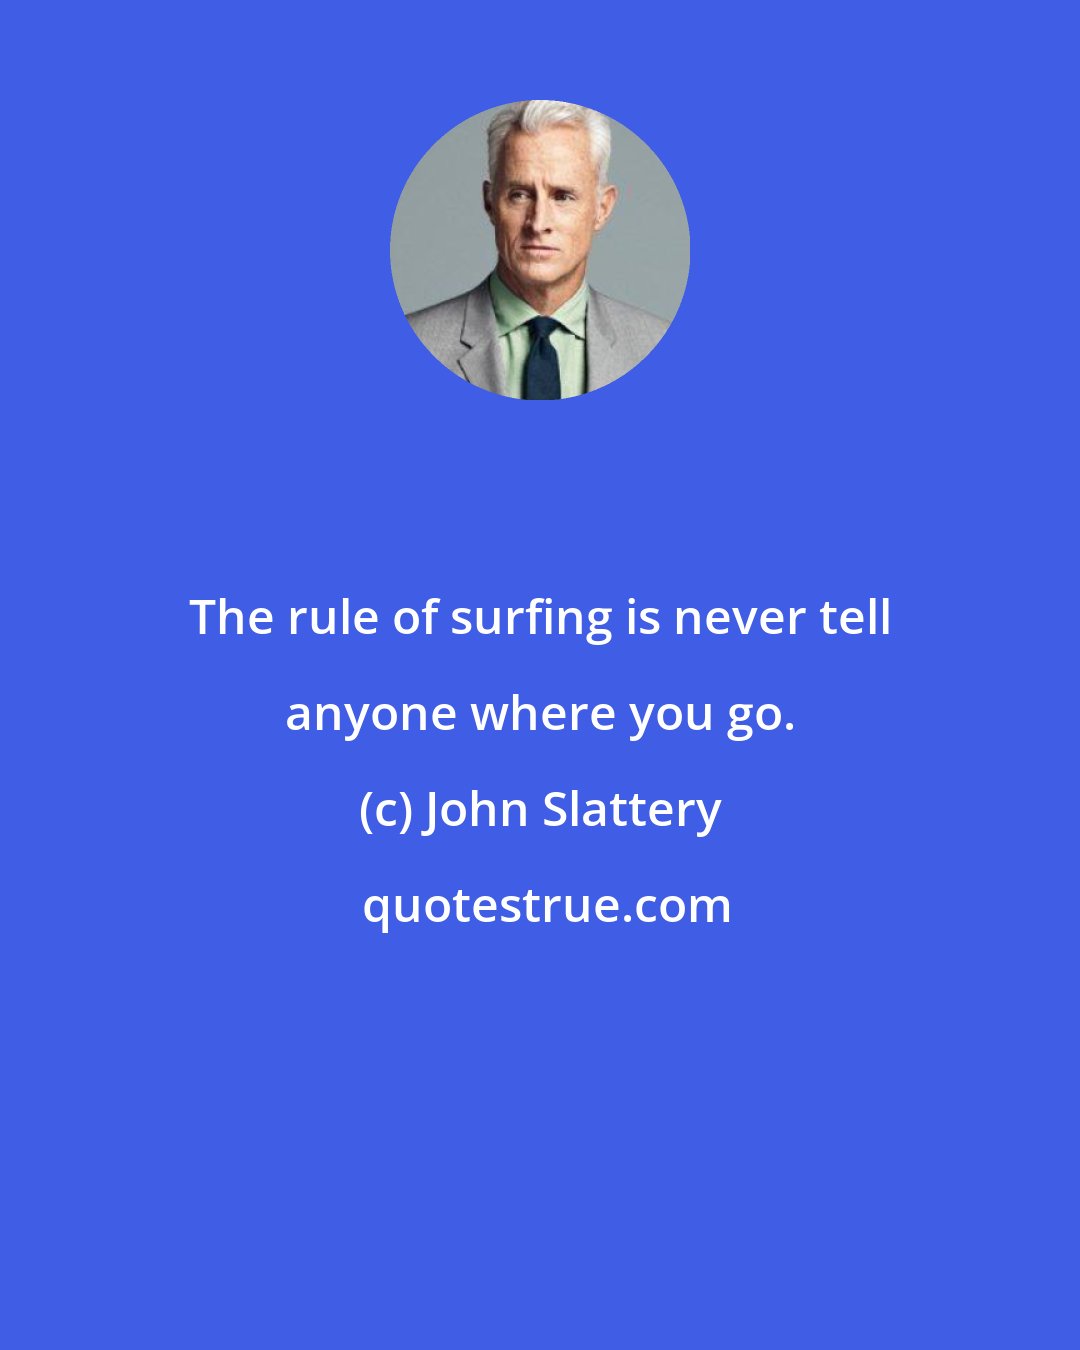 John Slattery: The rule of surfing is never tell anyone where you go.